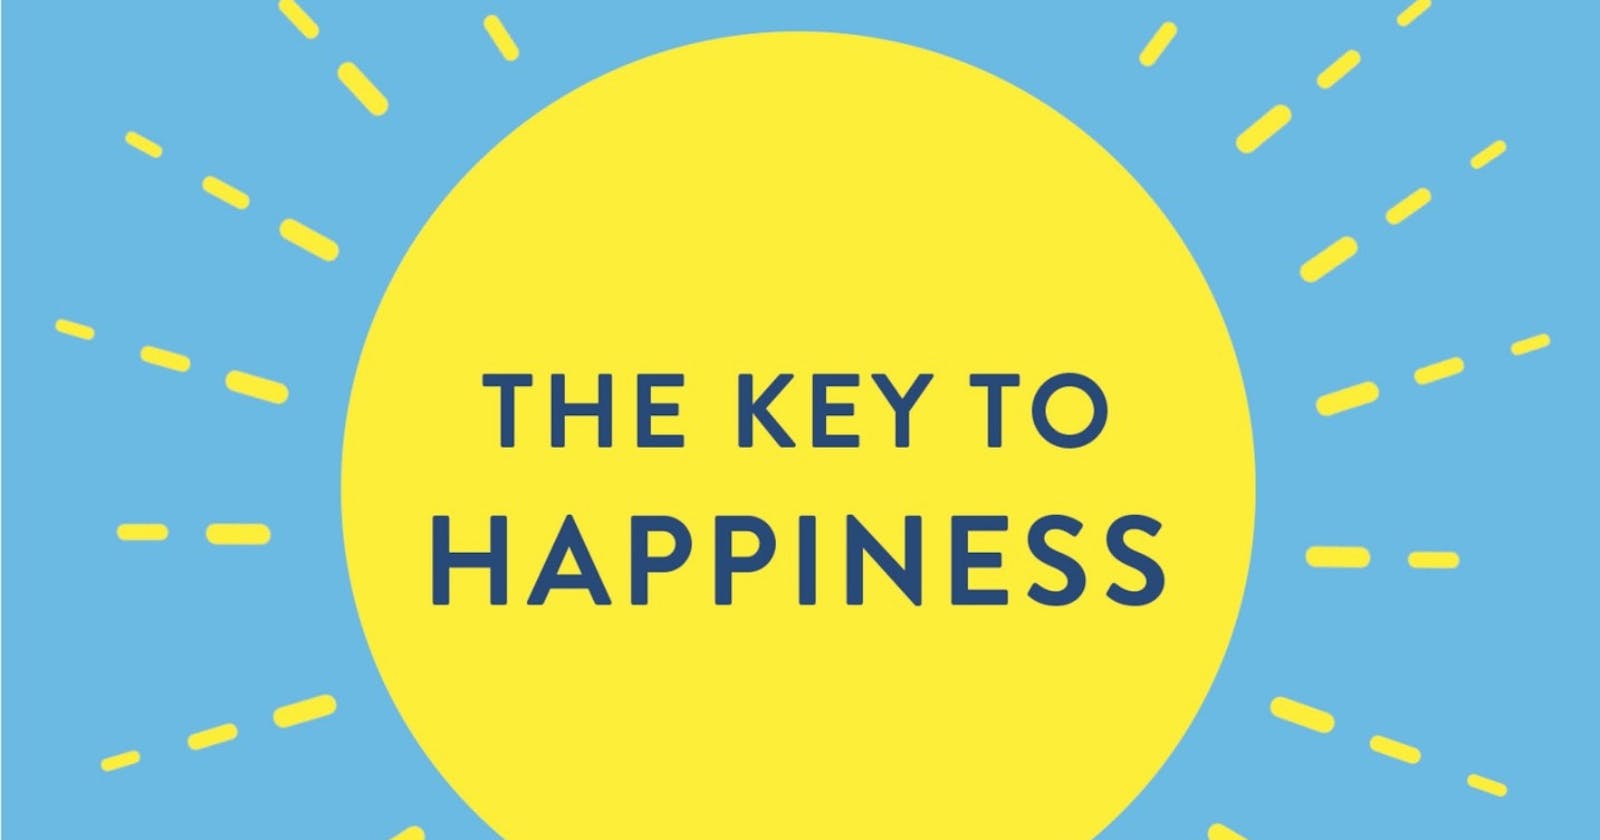 Summary-The Key to Happiness - Meik Wiking